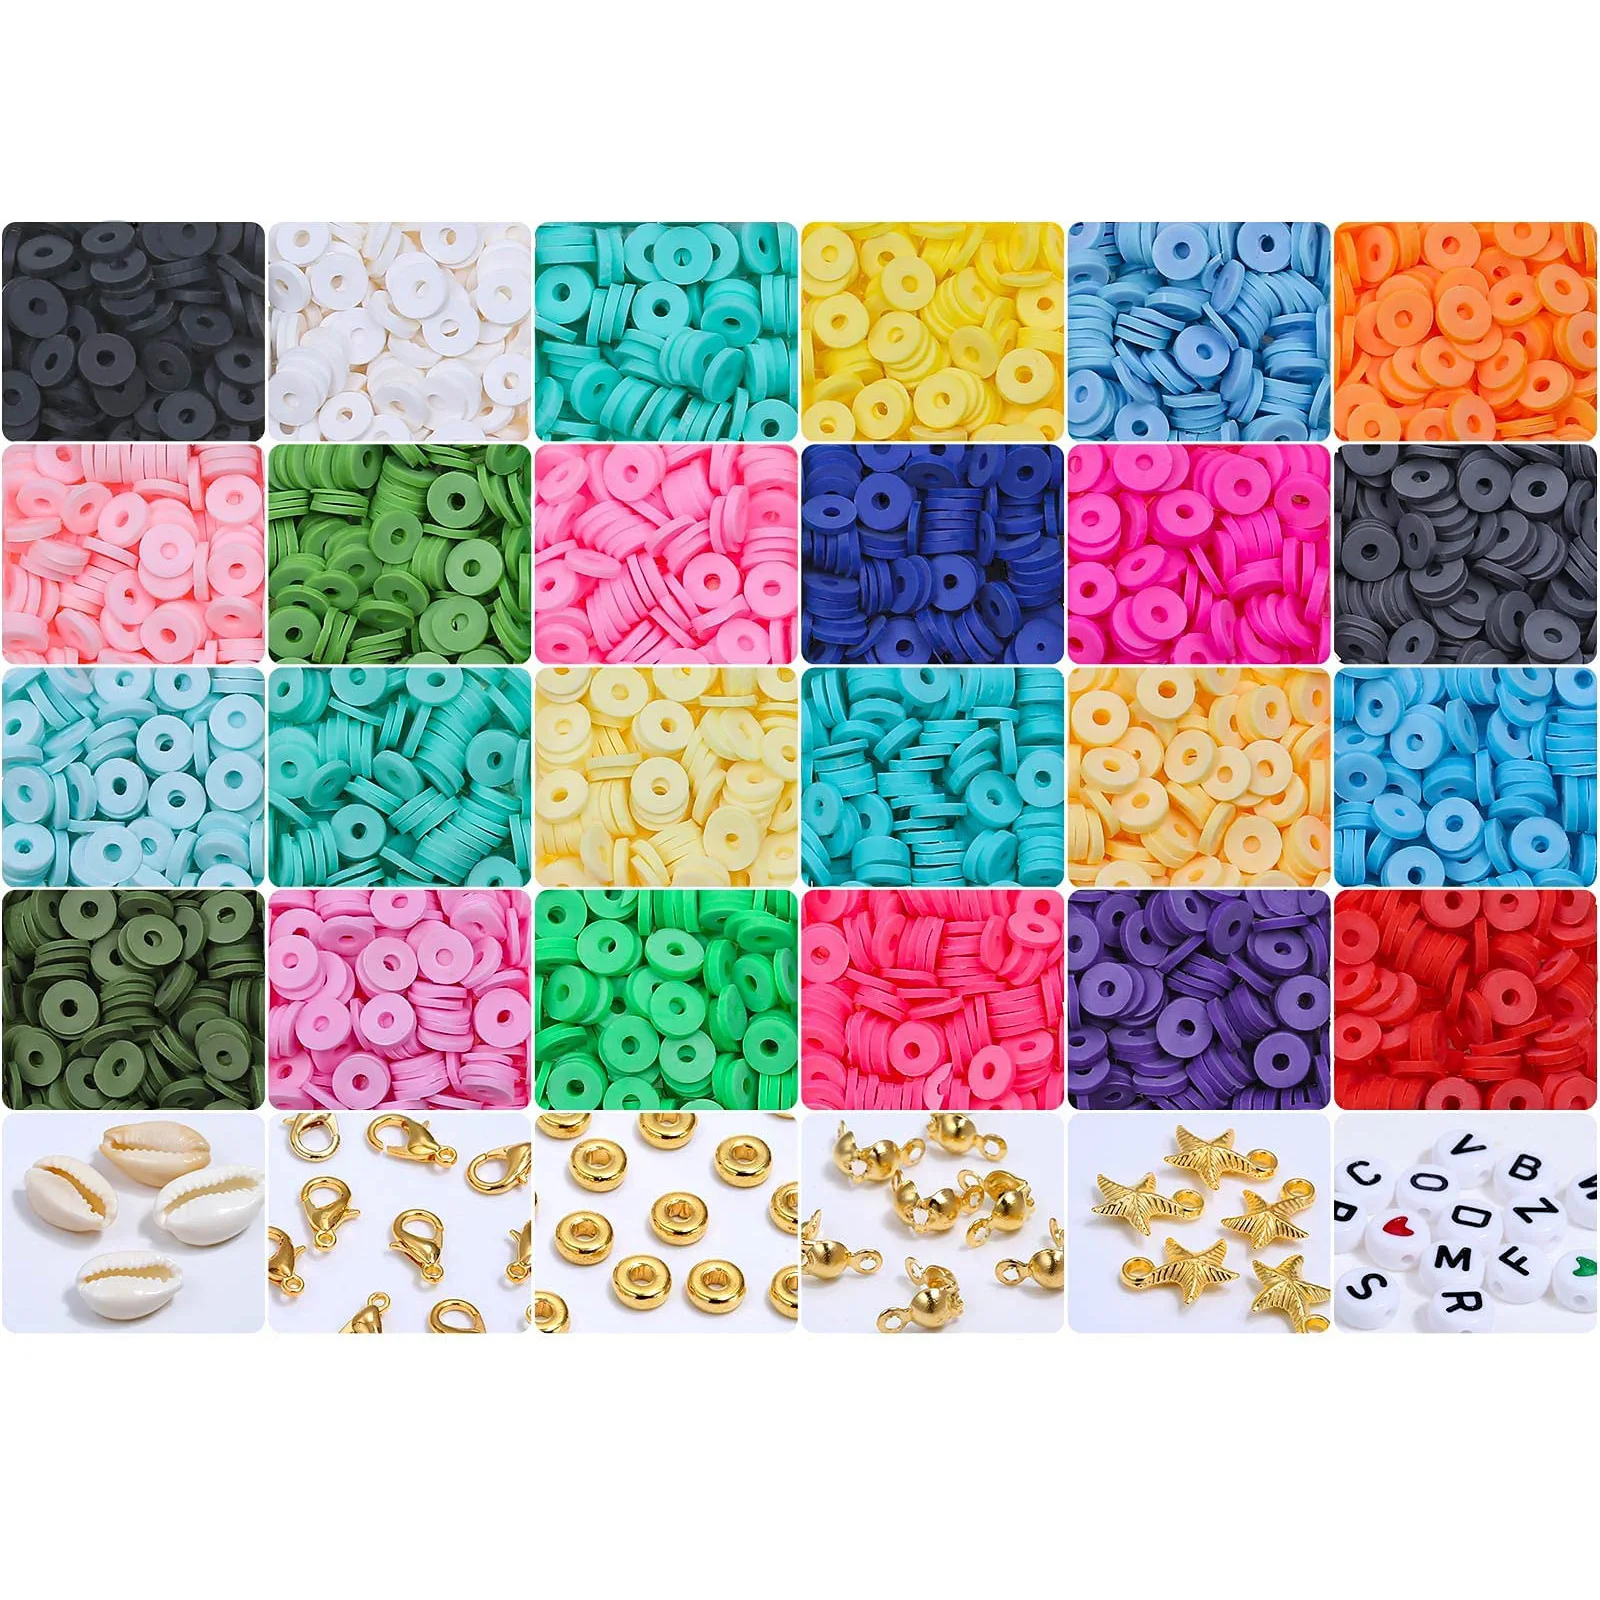 5310pcs Hot Selling Colored Soft Ceramic Beads DIY Handmade Letter Loose Beads Sets Flat Clay Beads